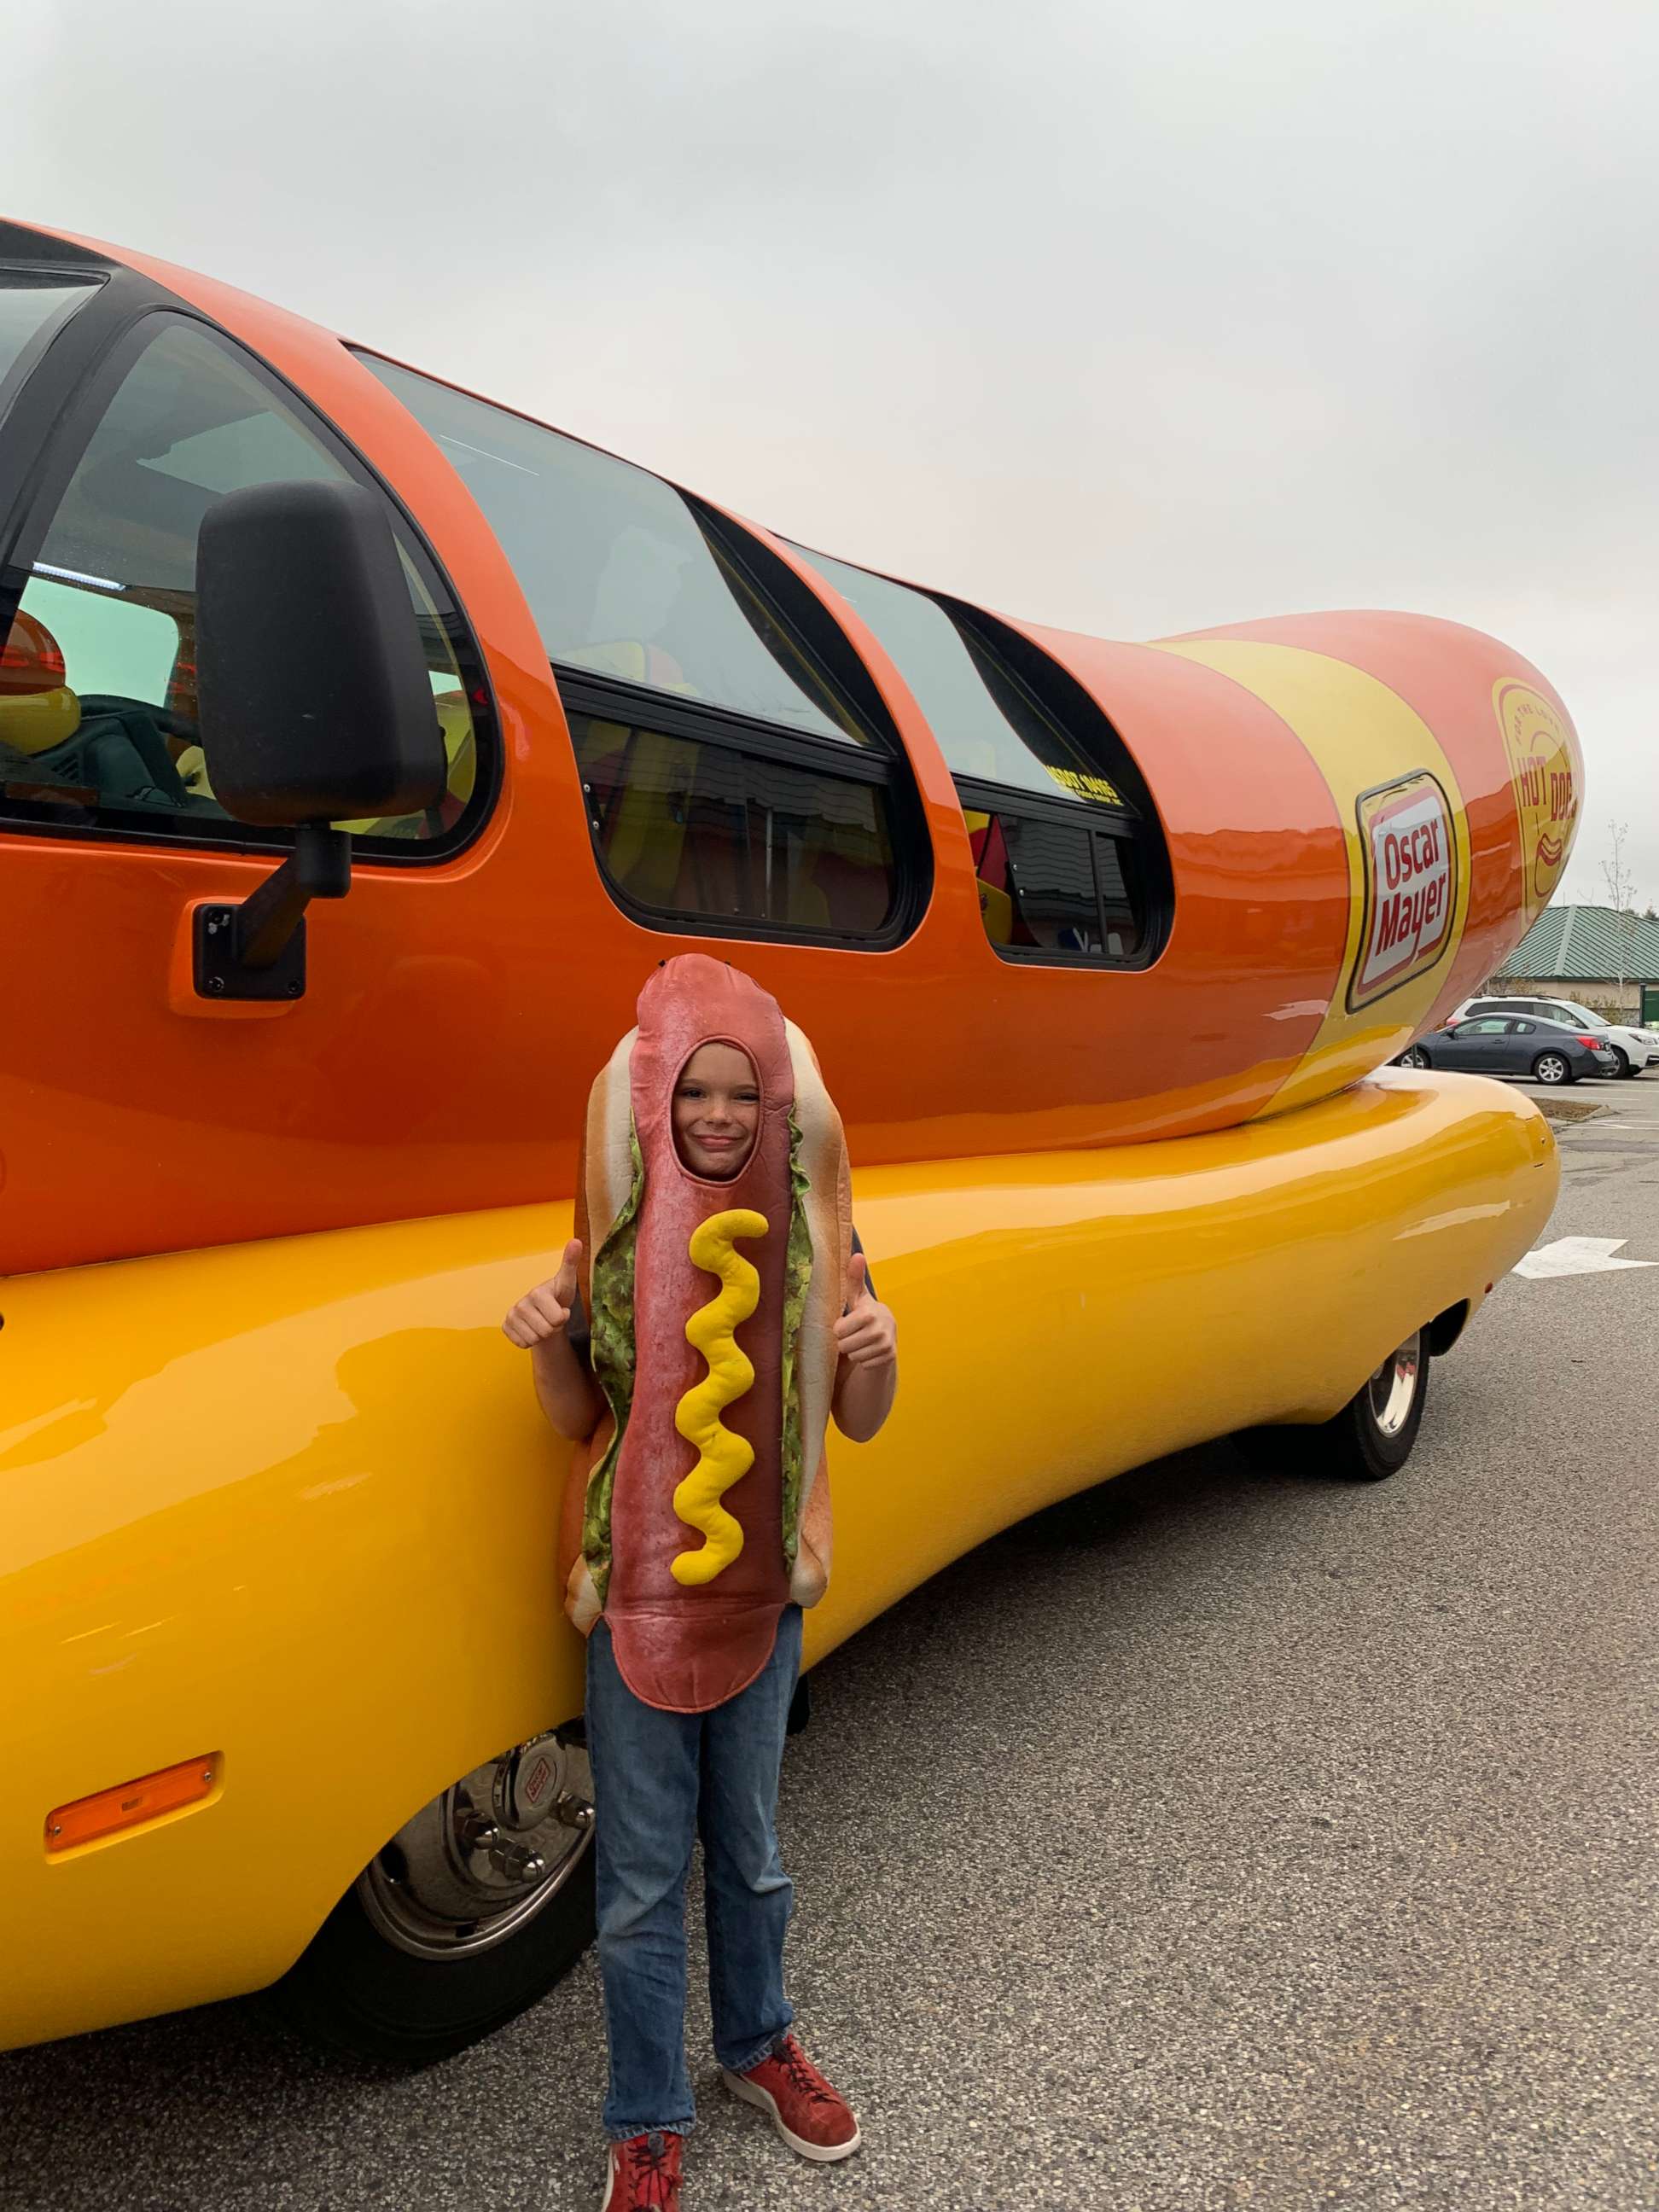 PHOTO: The Oscar Mayer Wienermobile picked up Jake Arsenault and his friends for a special ride to go to the movies.